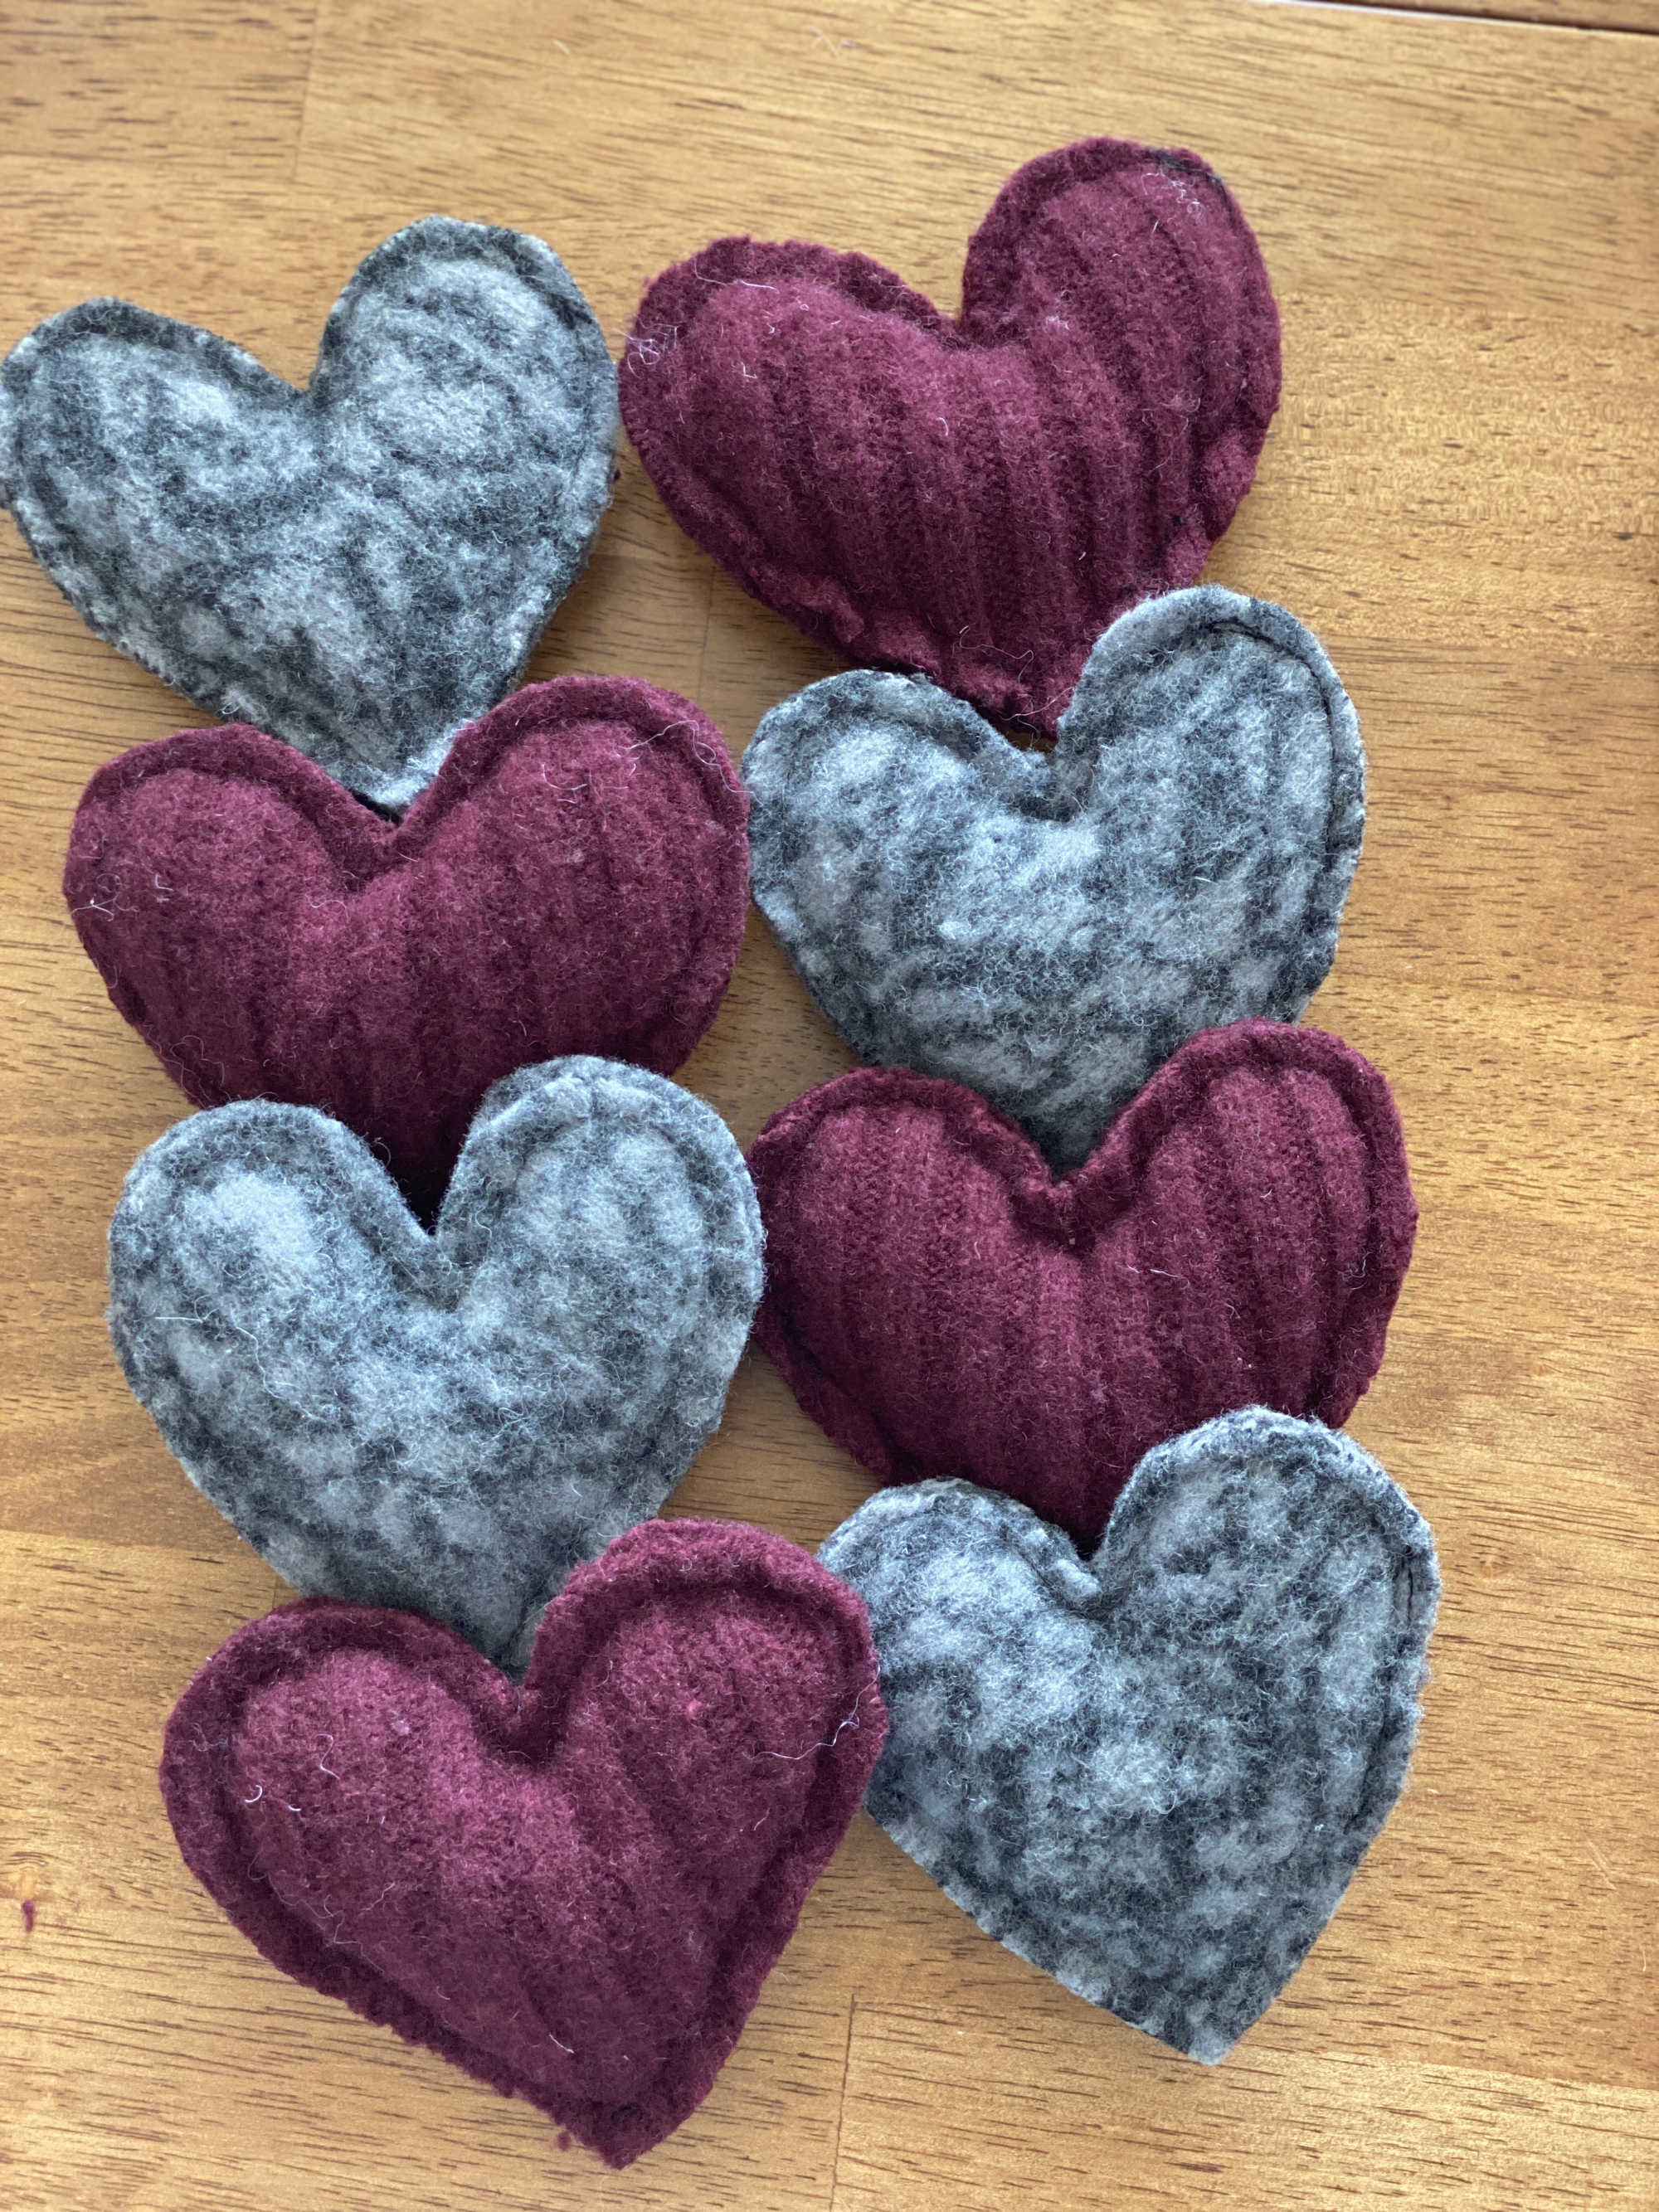 Two rows of stuffed grey and maroon felted hearts.